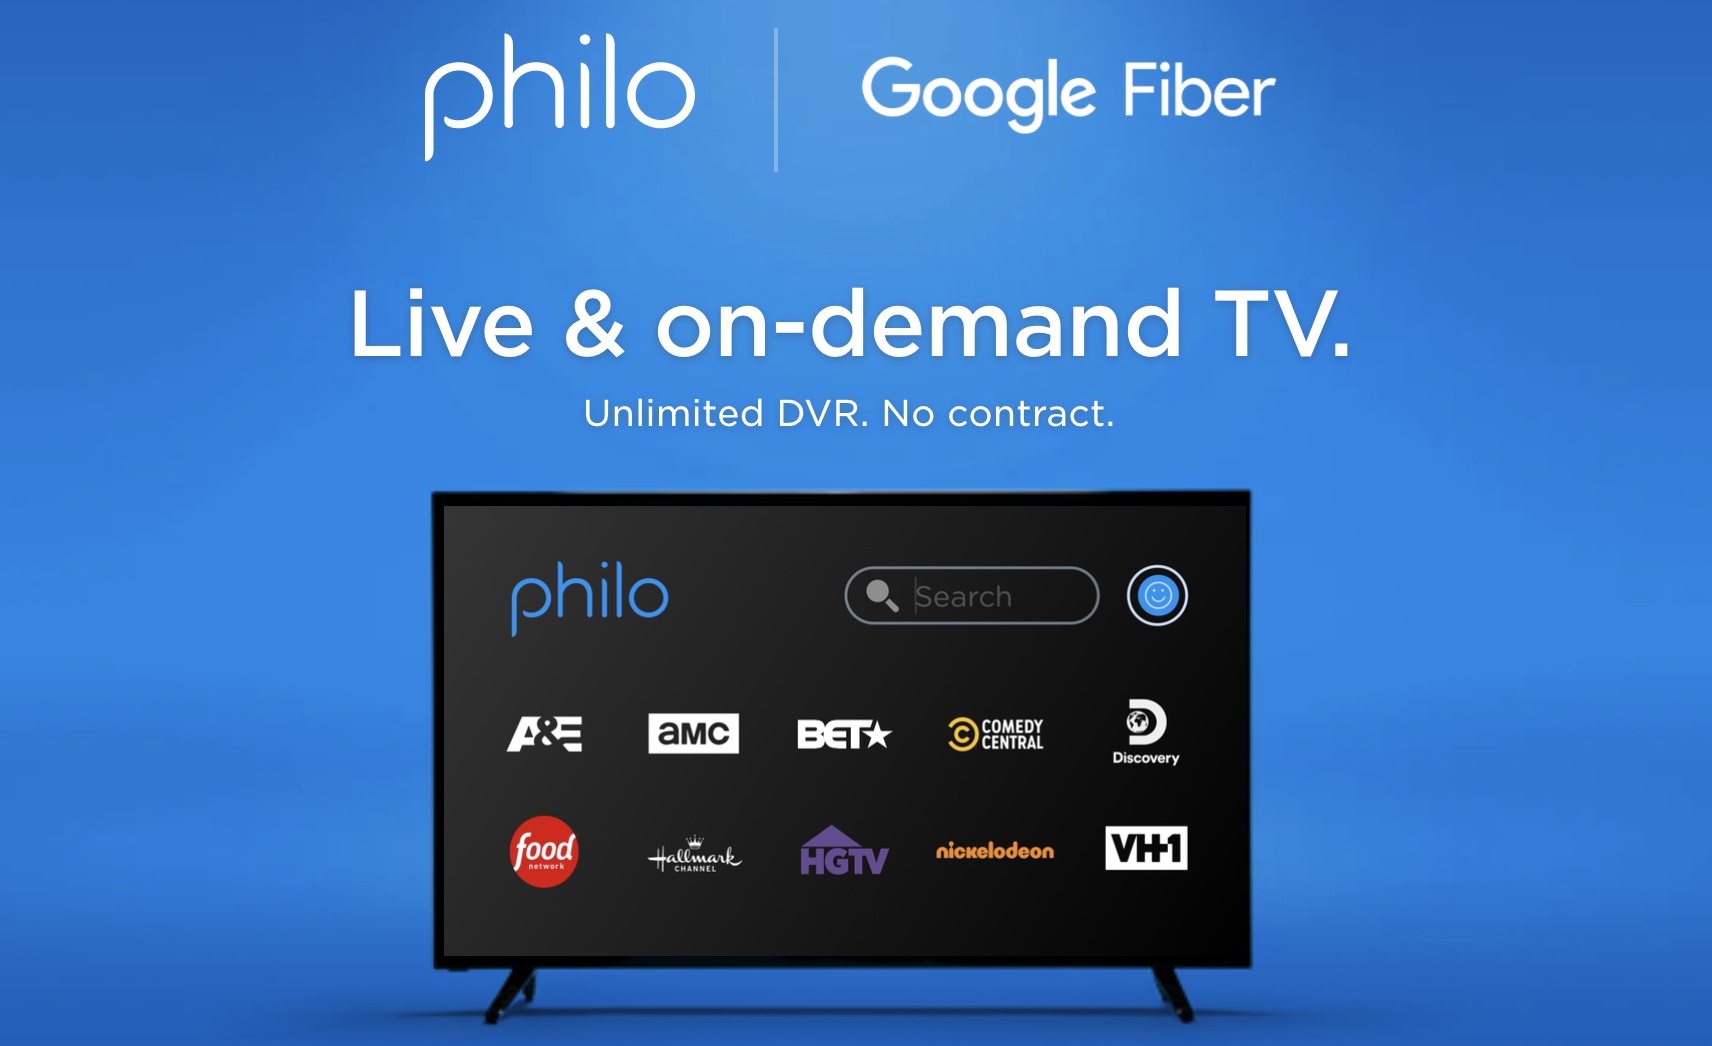 Google Fiber Adds Philo Streaming As An Option Next To Youtube And Fubo Wilson S Media - codes for 800 coins roblox agents youtube